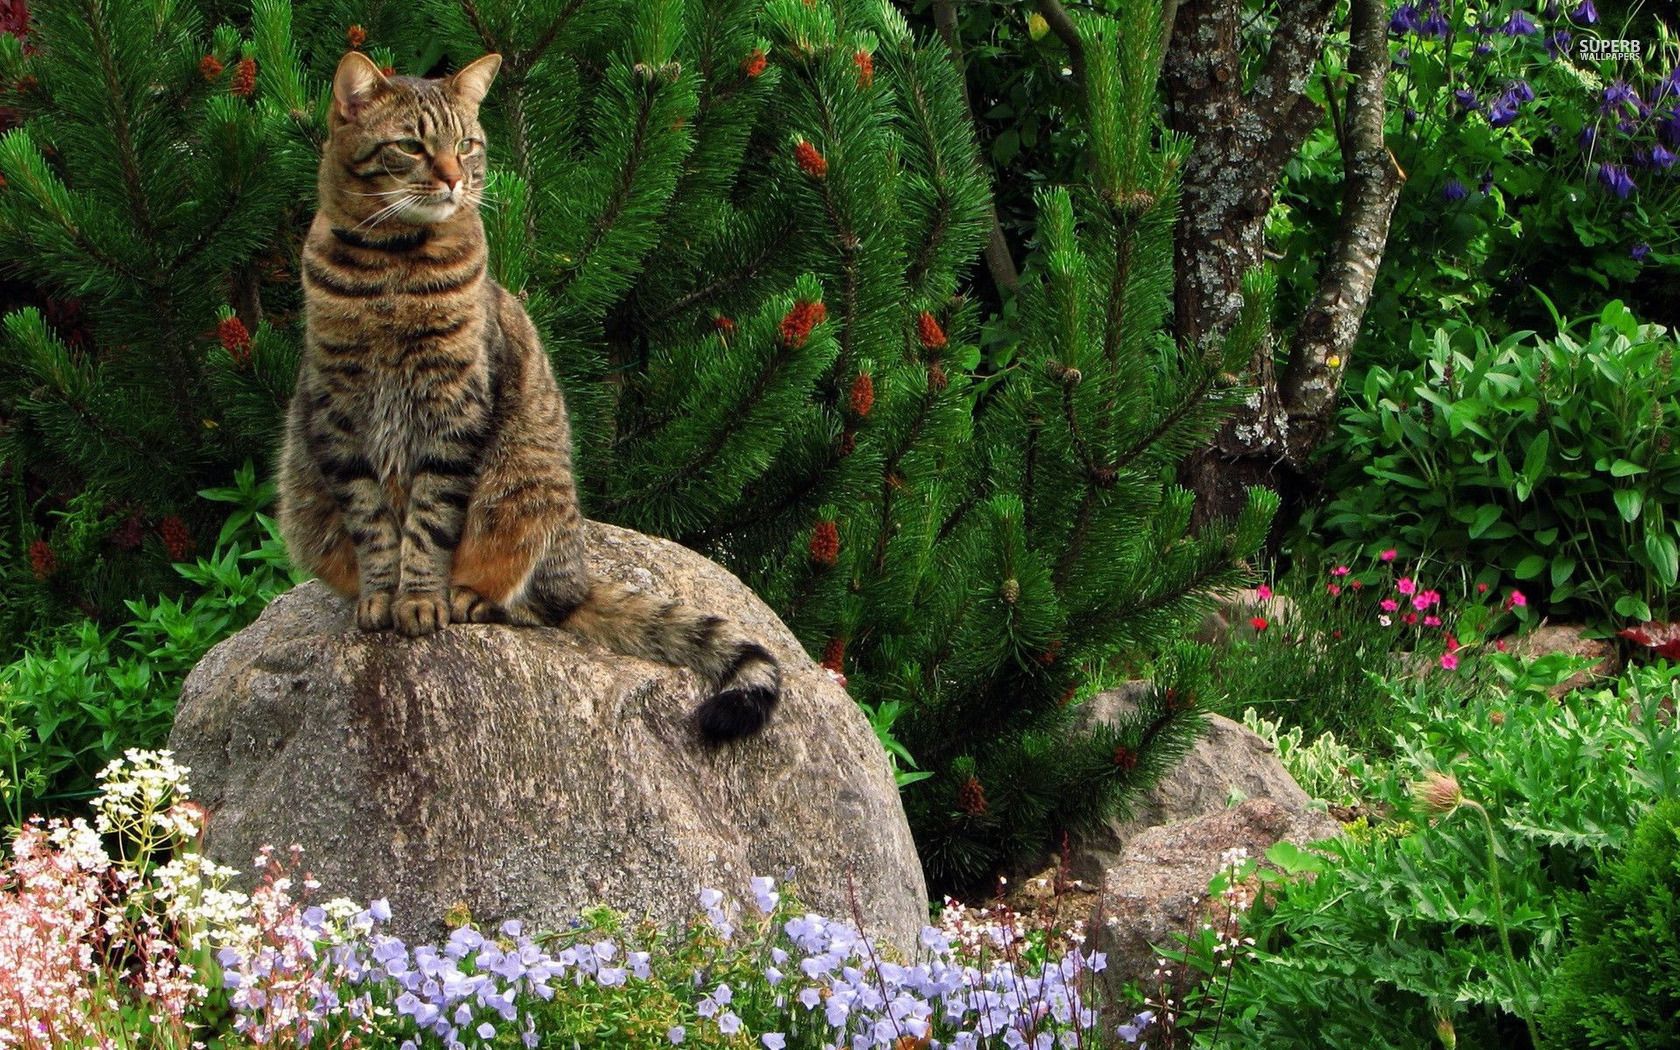 Cat on the rock near a pine tree wallpaper - Animal wallpapers ...